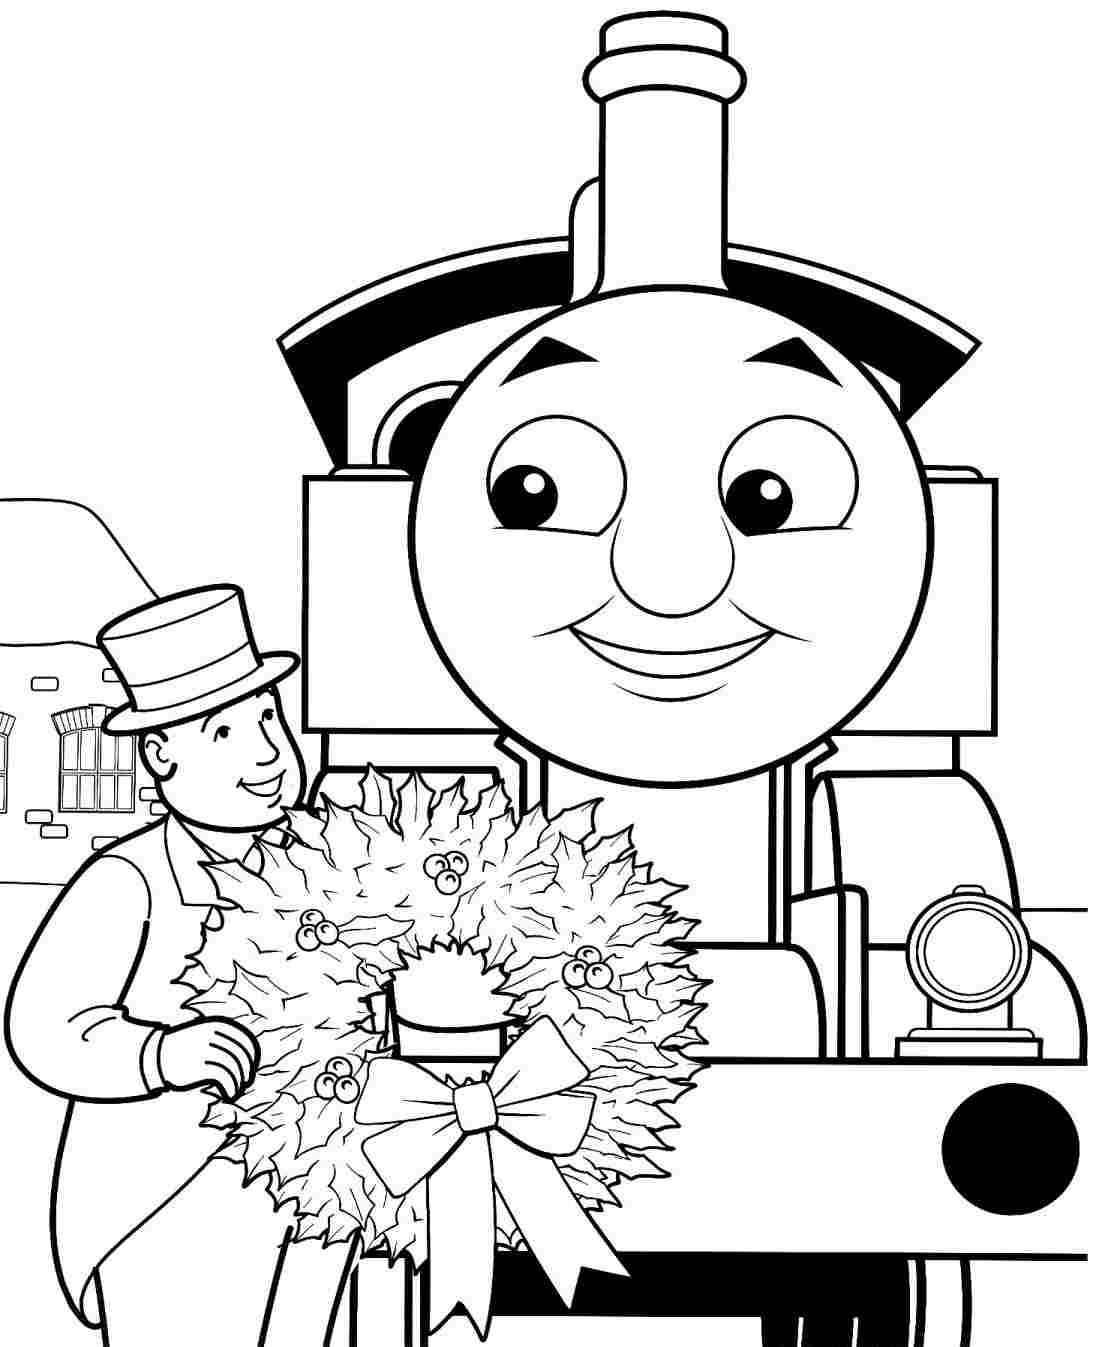 Thomas The Train And Friends Coloring Pages at Free